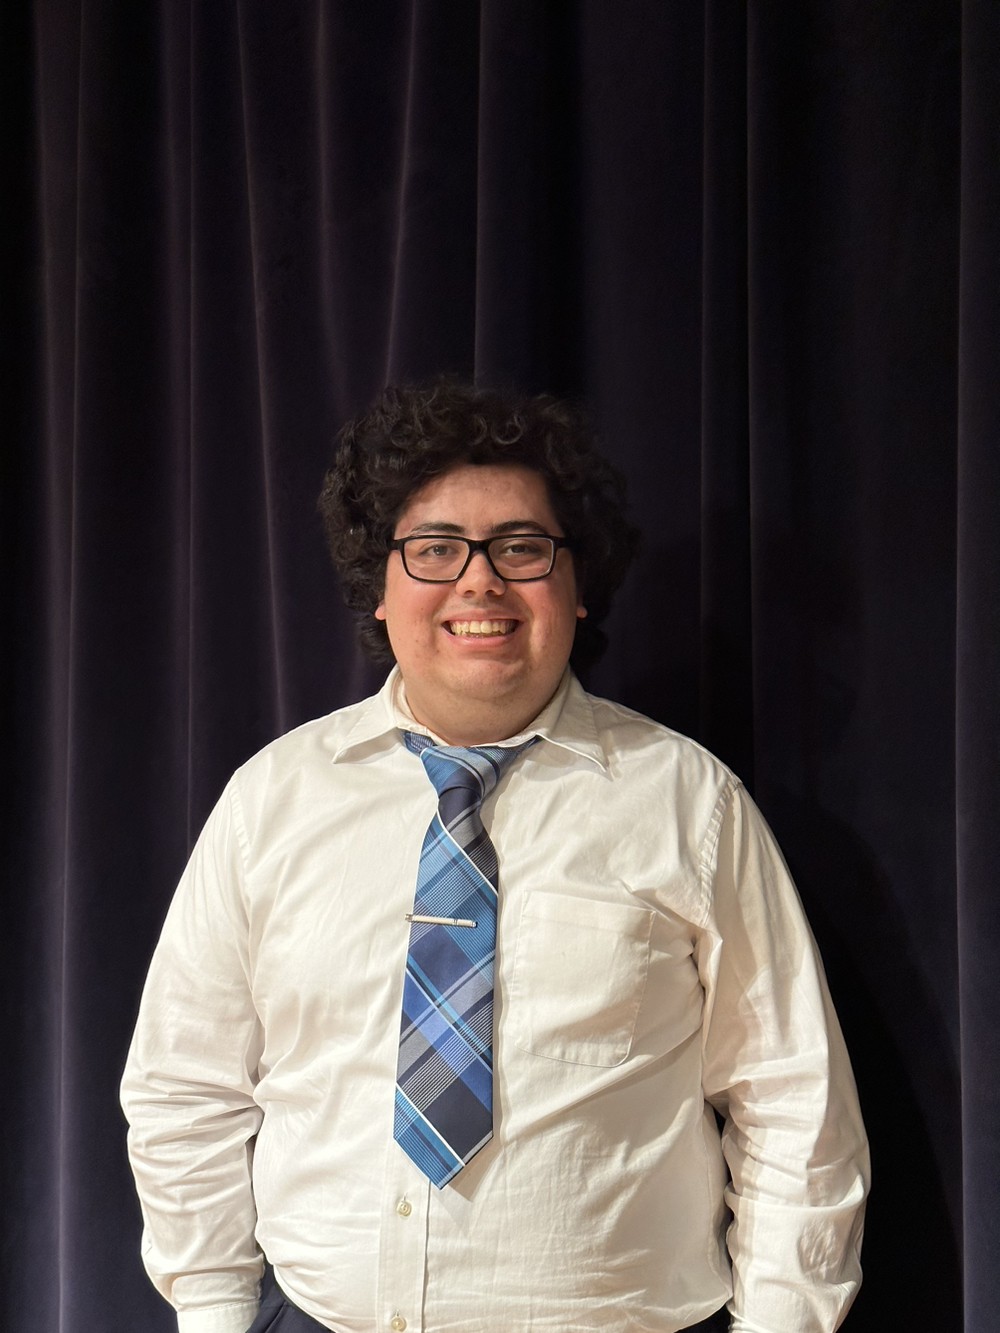 Latino student with glasses and dark curly hair in front of dark curtain in white shirt with blue patterned tie.